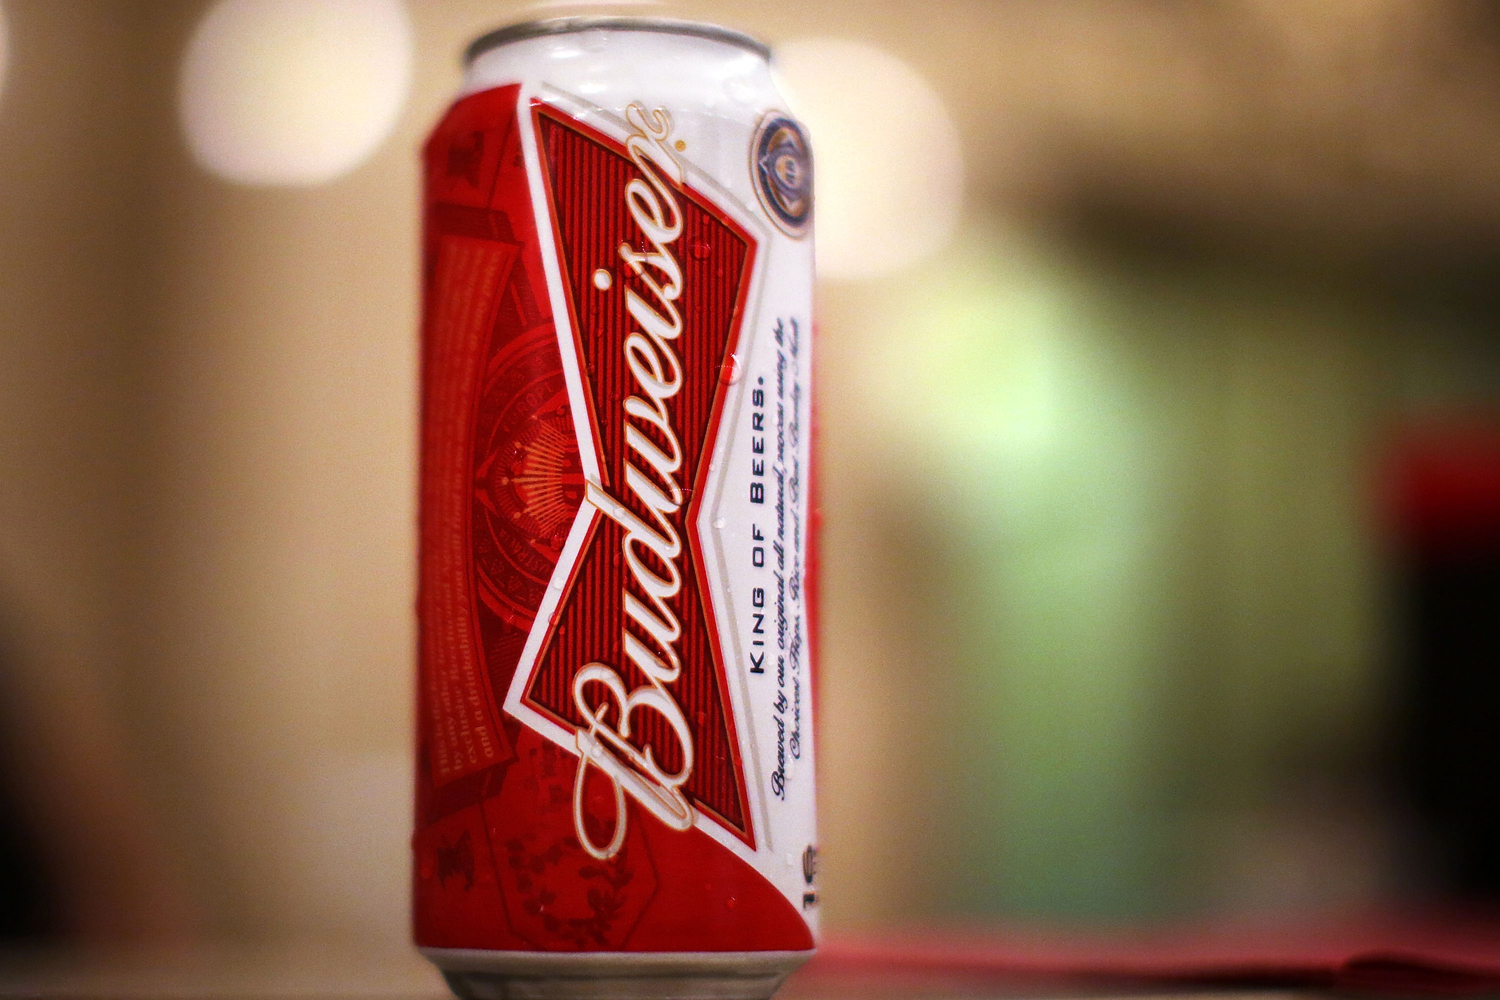 A can of Budweiser beer is displayed in a kiosk in Grand Central Terminal on Feb. 27, 2013 in New York.